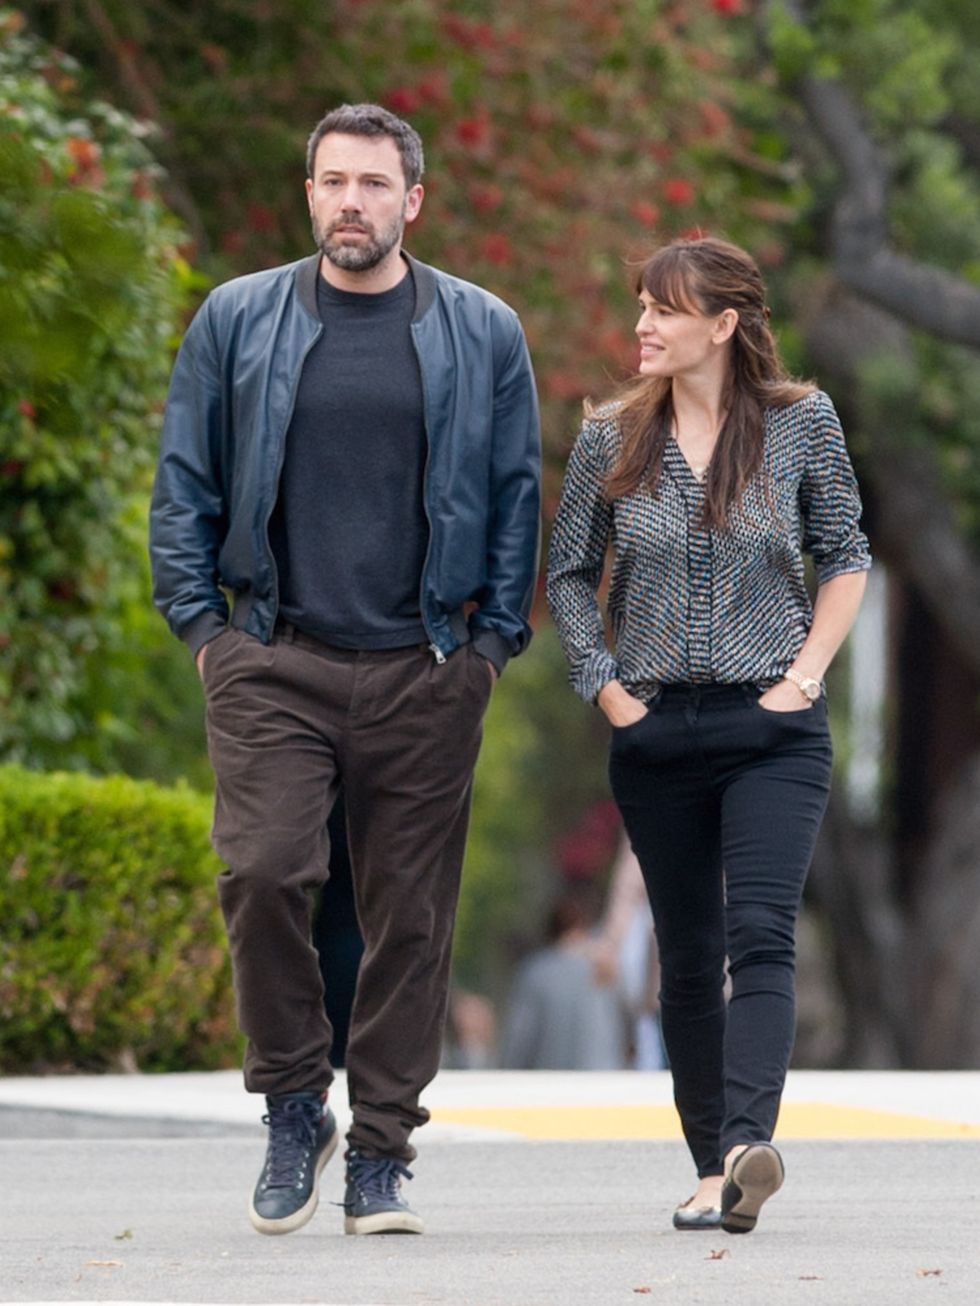 Ben Affleck and Jennifer Garner announced their plans to divorce in June 2015 after 10 years of marriage.